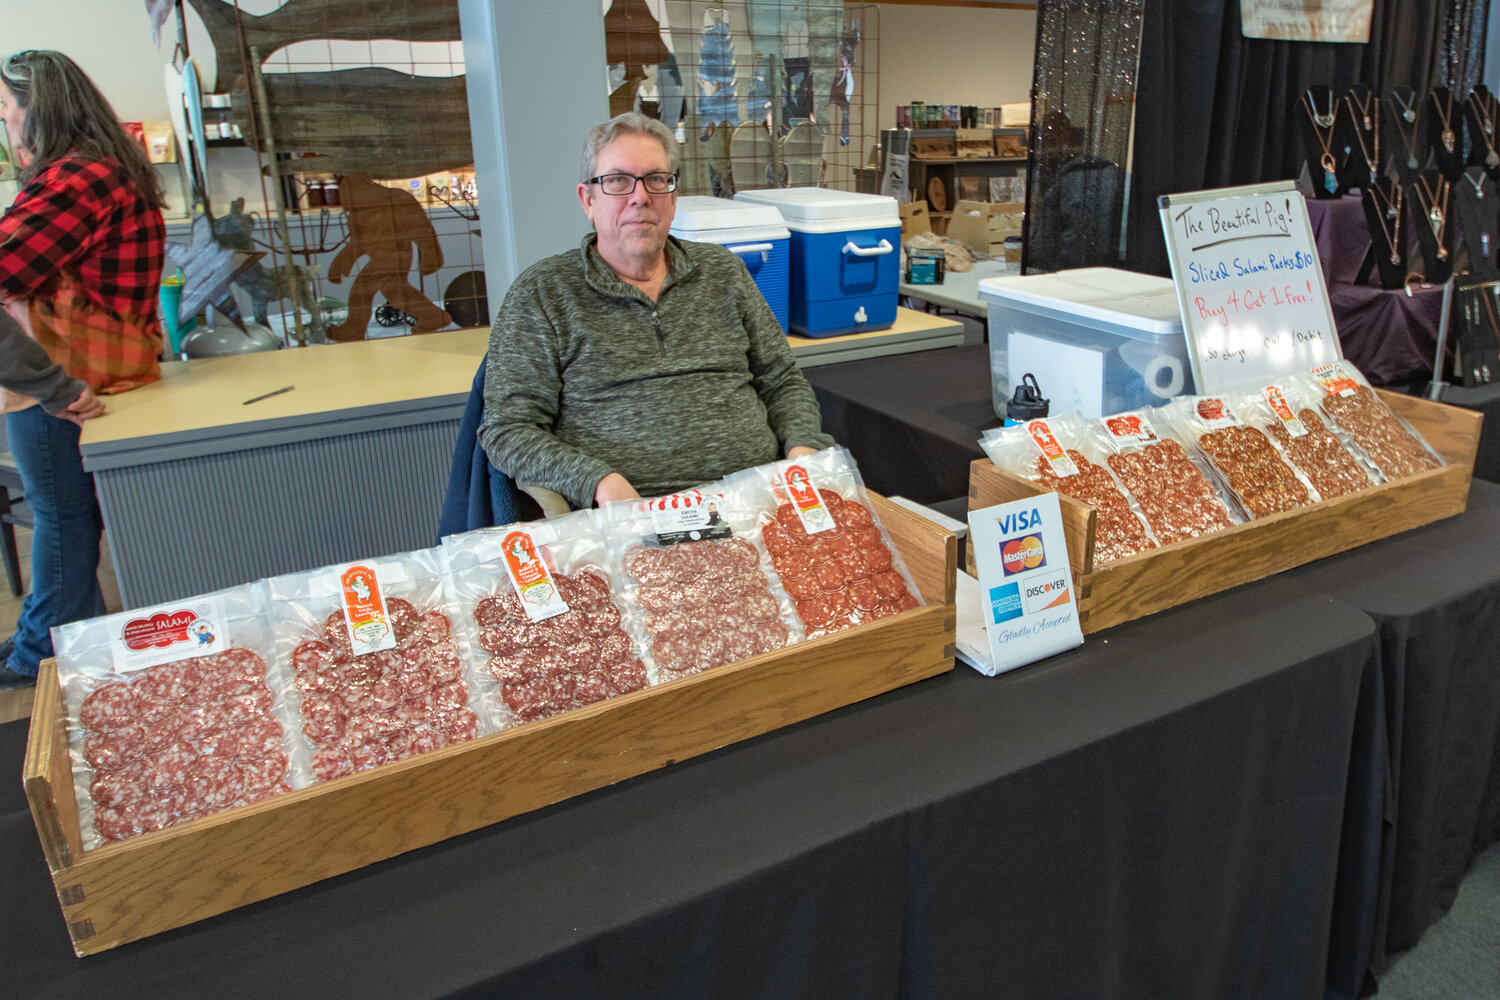 Christopher Leach of The Beautiful Pig sits in front of European-inspired charcuterie meats on Friday, Feb. 2 at the newly opened Northwest Salmon Smokehouse and Artisan Market. Leach smokes and ages the meats himself after he travelled to Europe to gather recipes and has even recieved a Charcuterie Professional Certification from the International Dairy Deli Bakery Association.